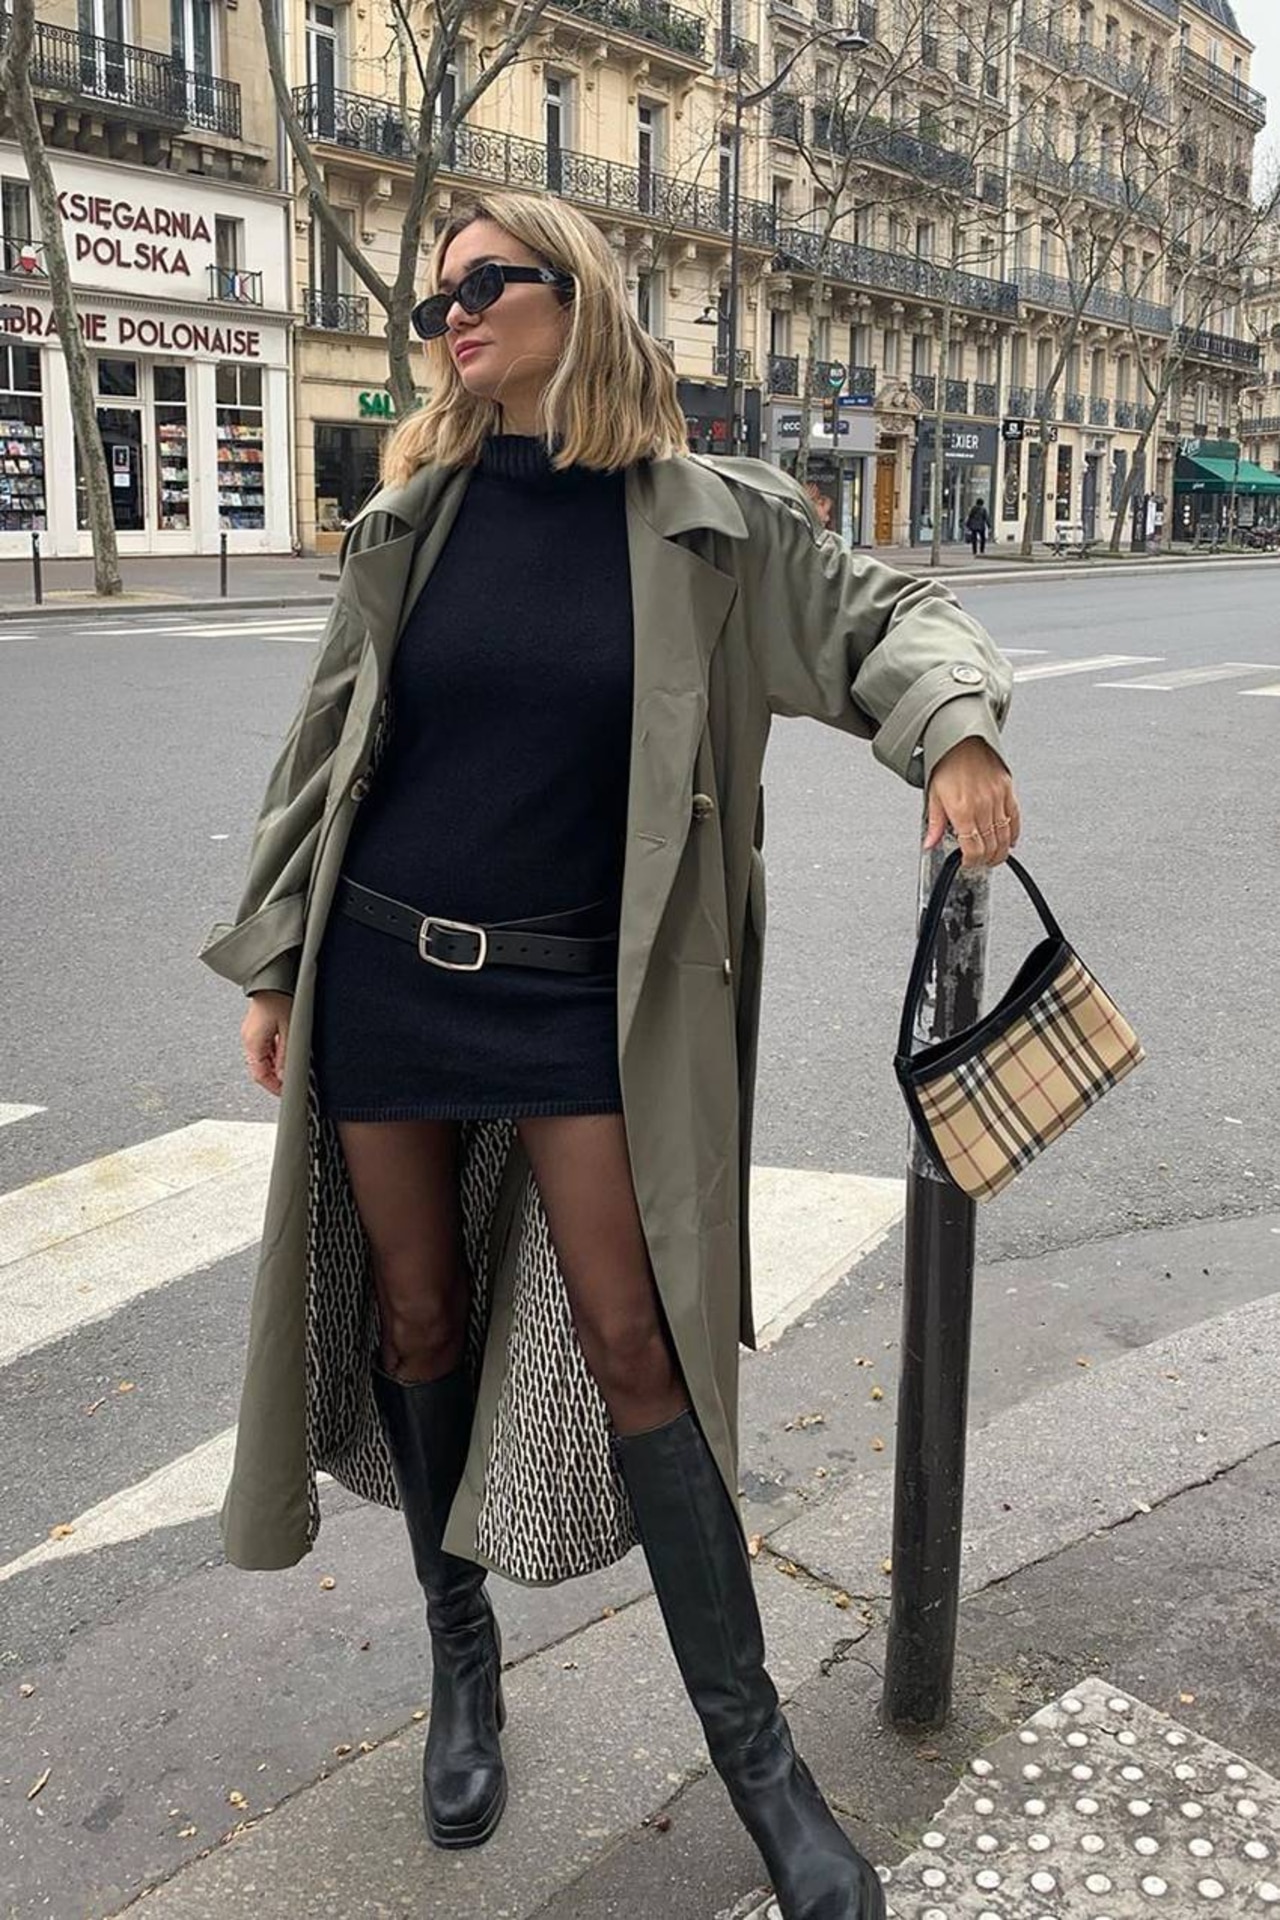 How French Women Look Après-Ski Chic This Winter